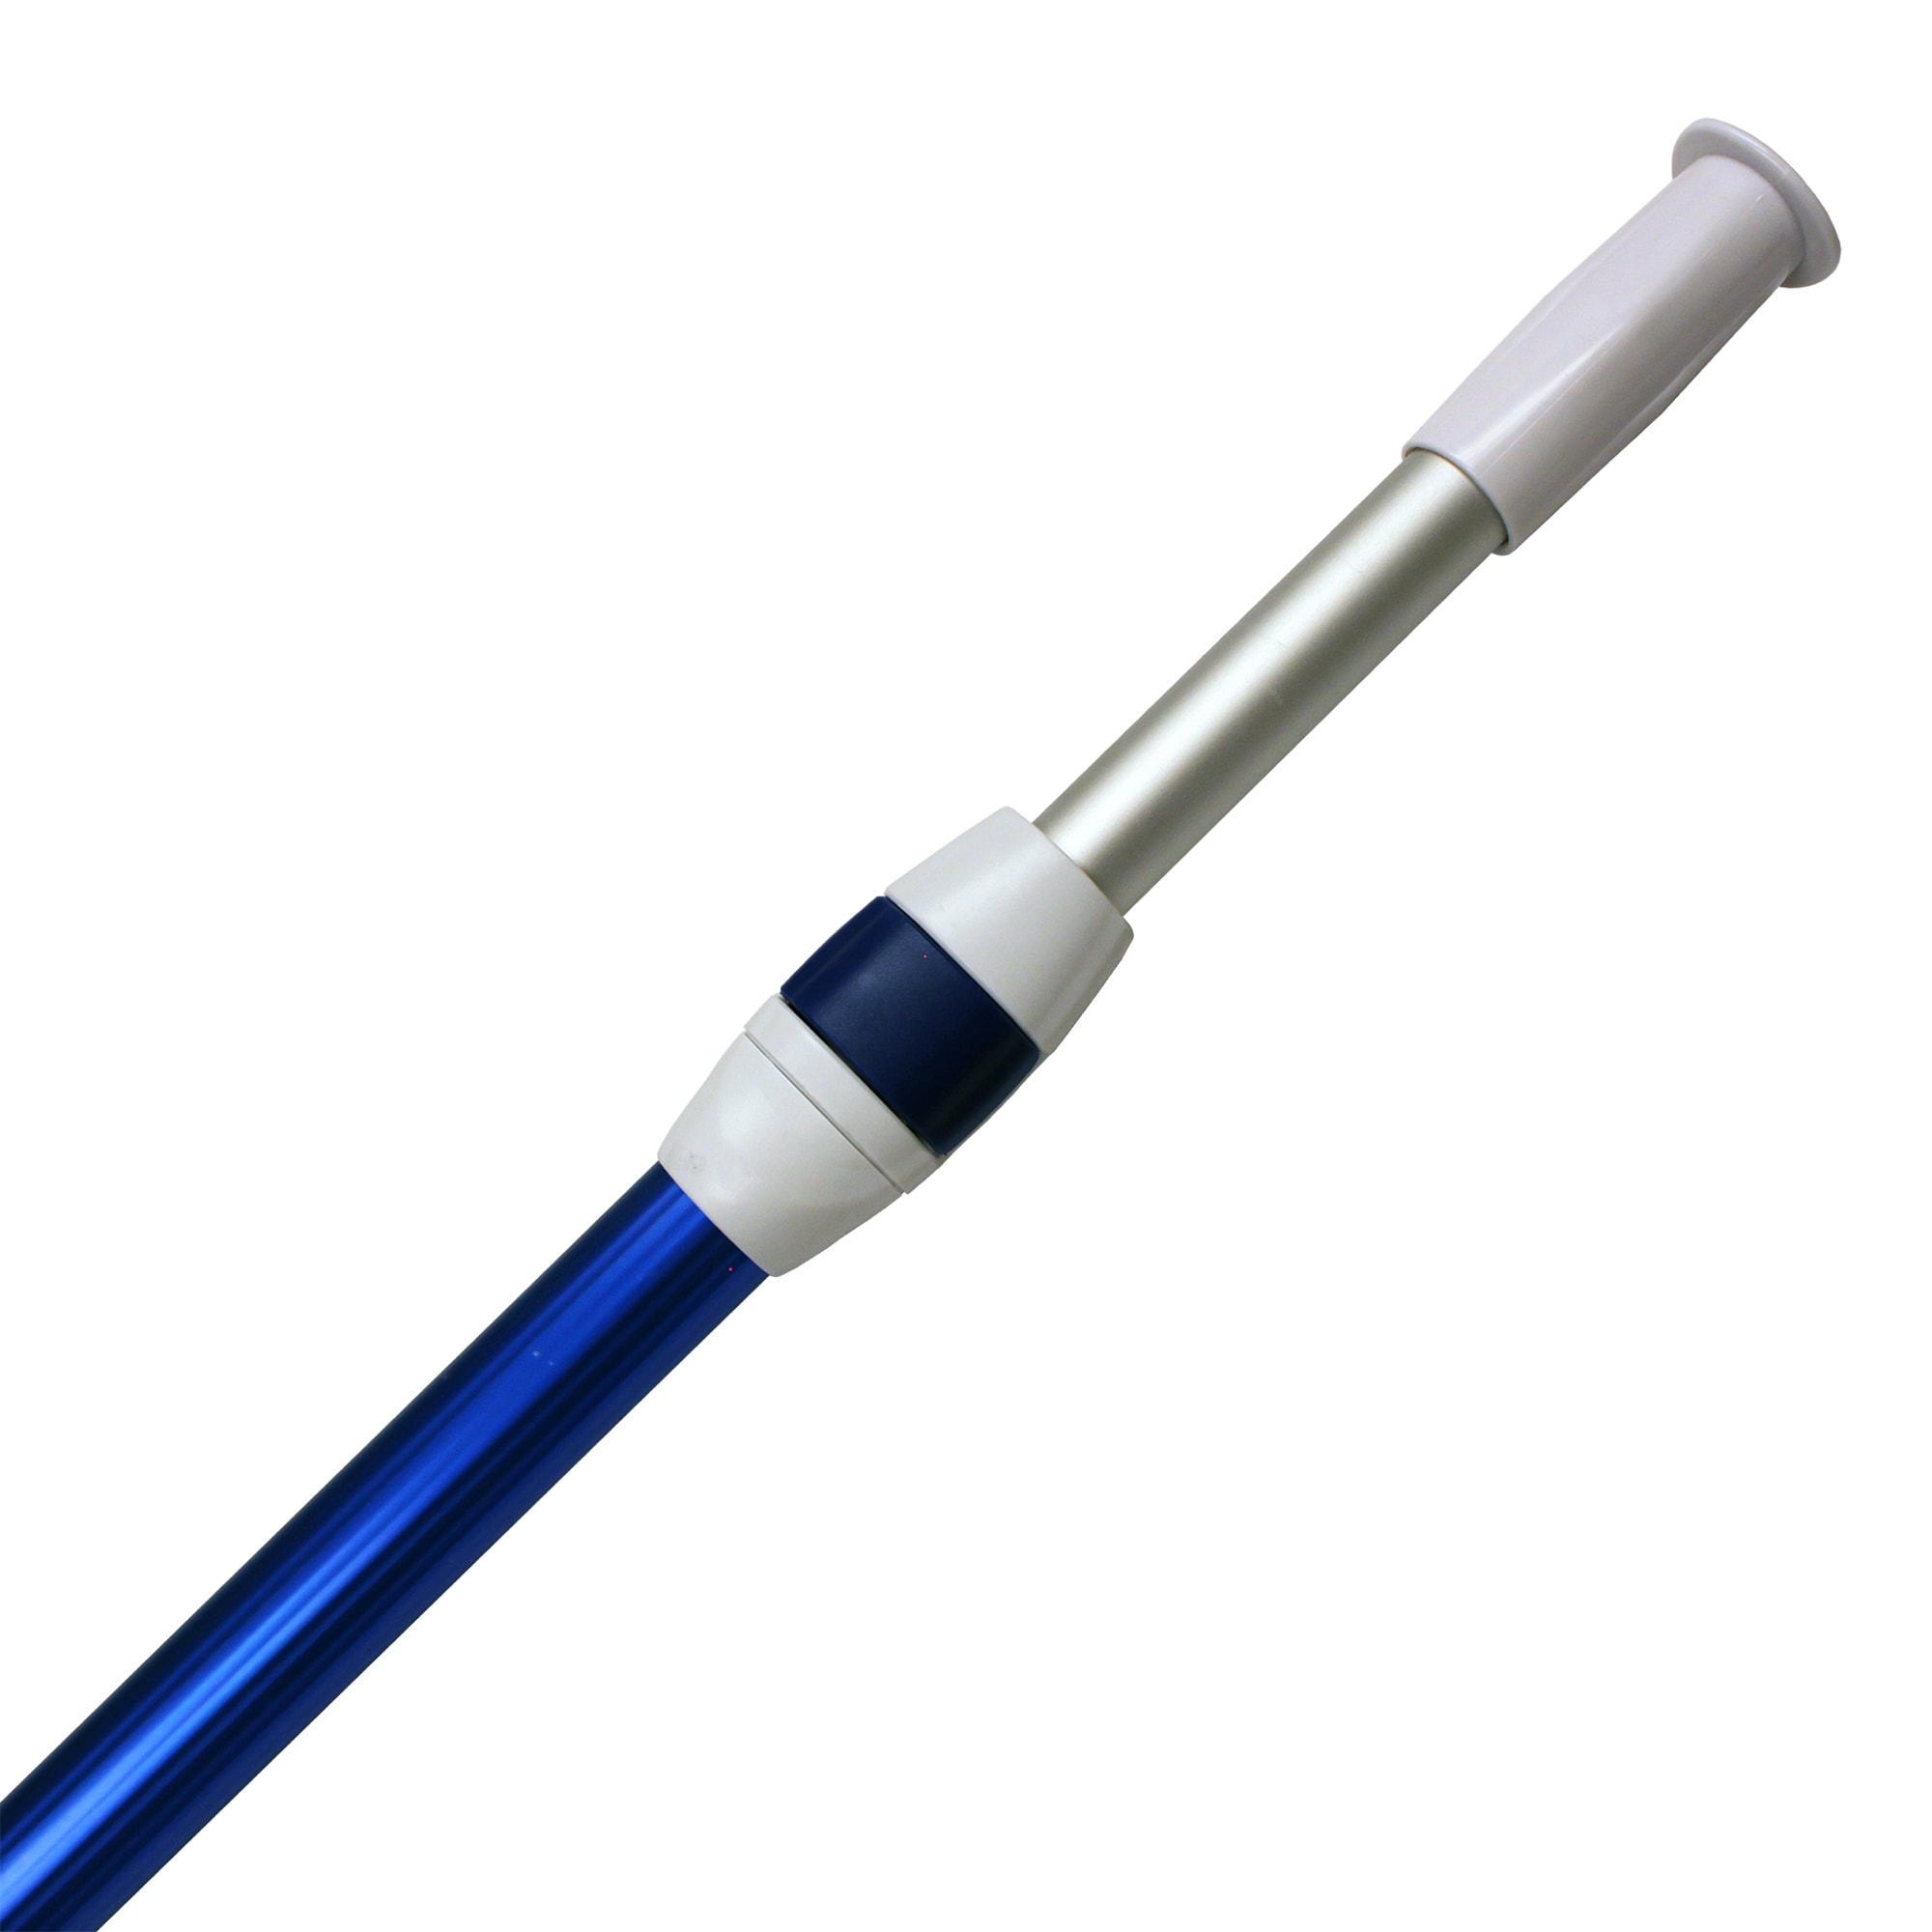 Telescopic Pool Pole, Telescopic Pole Heavy Duty For Skimming Net Rakes For  Brushes Vacuum Cleaners 